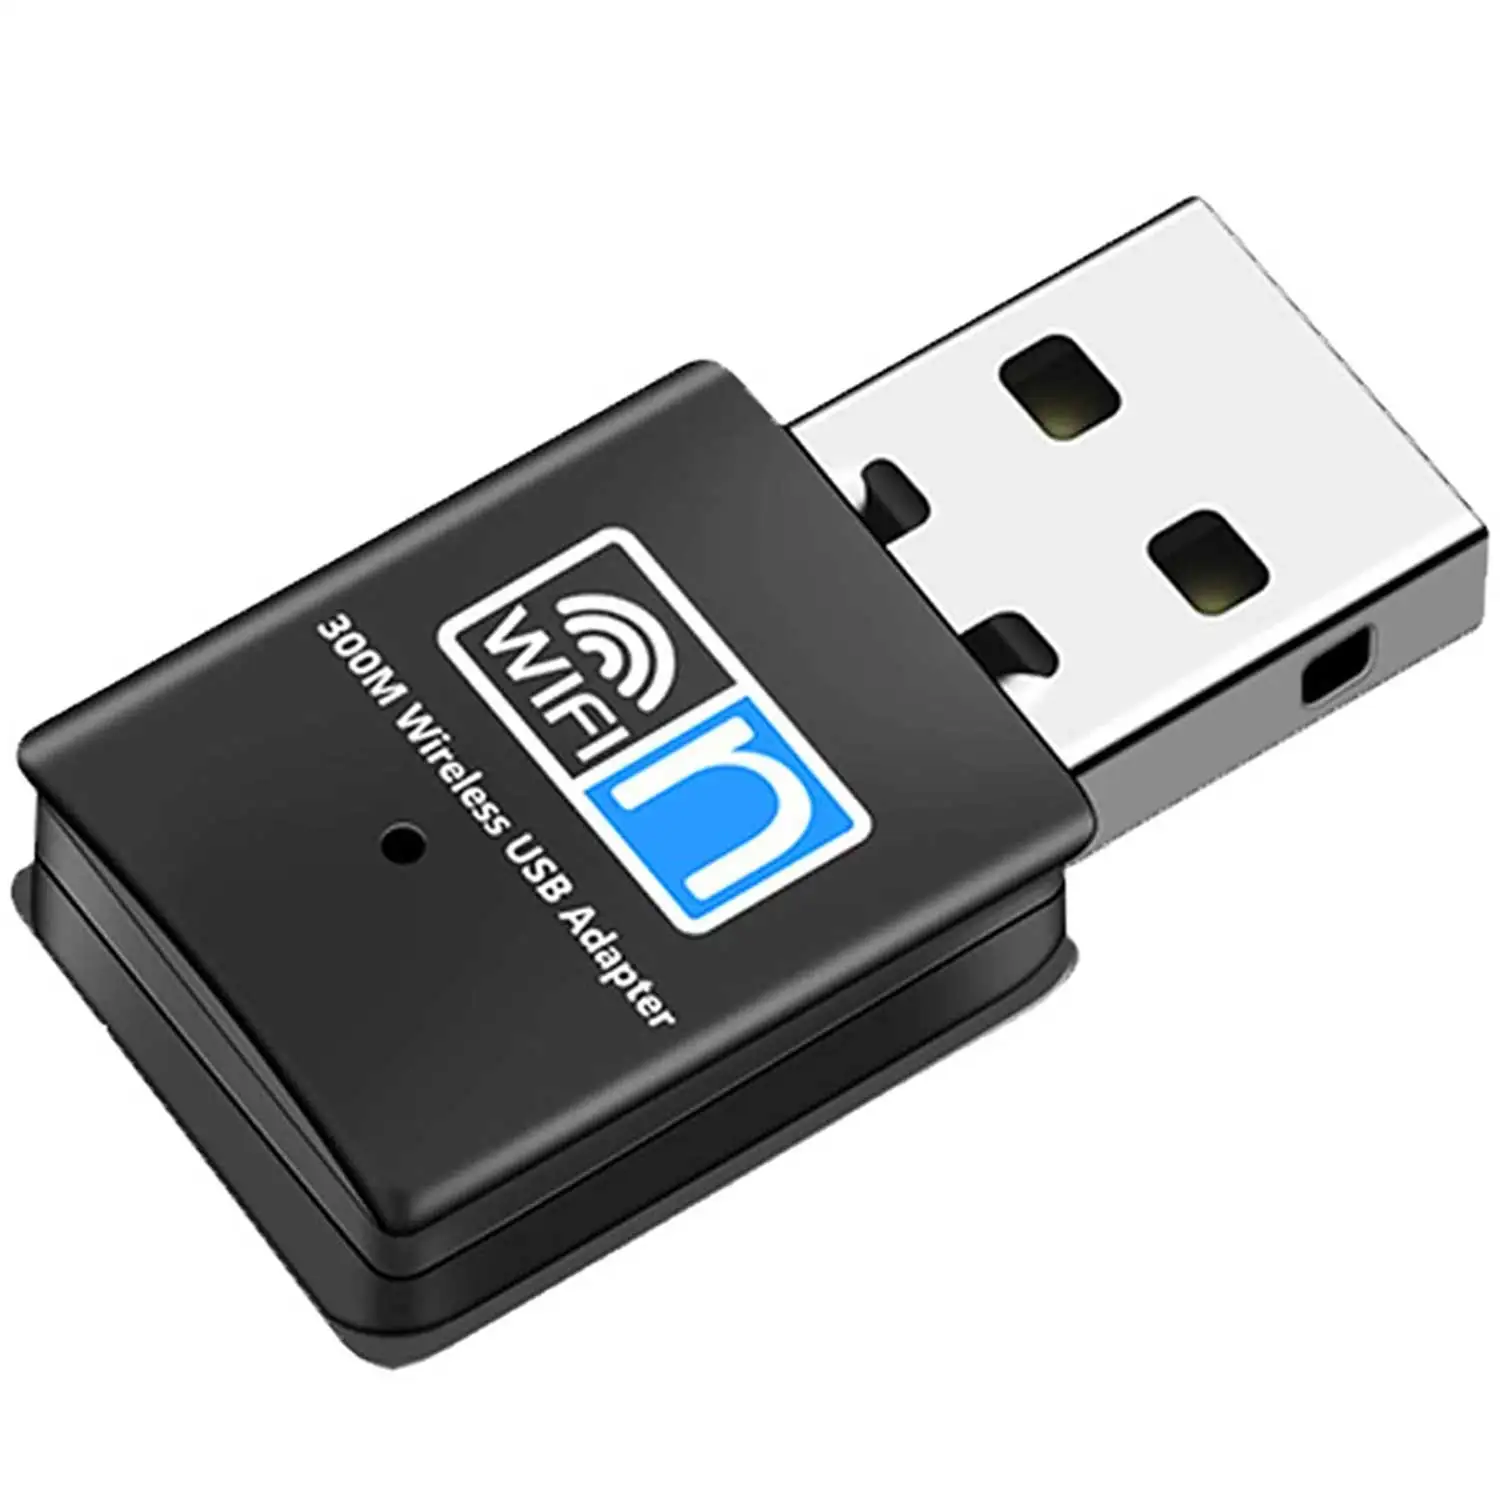 

Cheap 150Mbps 150Mbps 150Mbps Network Card Adapter Dual Band 2.4G 5.8G Wireless Usb 3.0 Adapter Usb2.0 Wifi Dongle